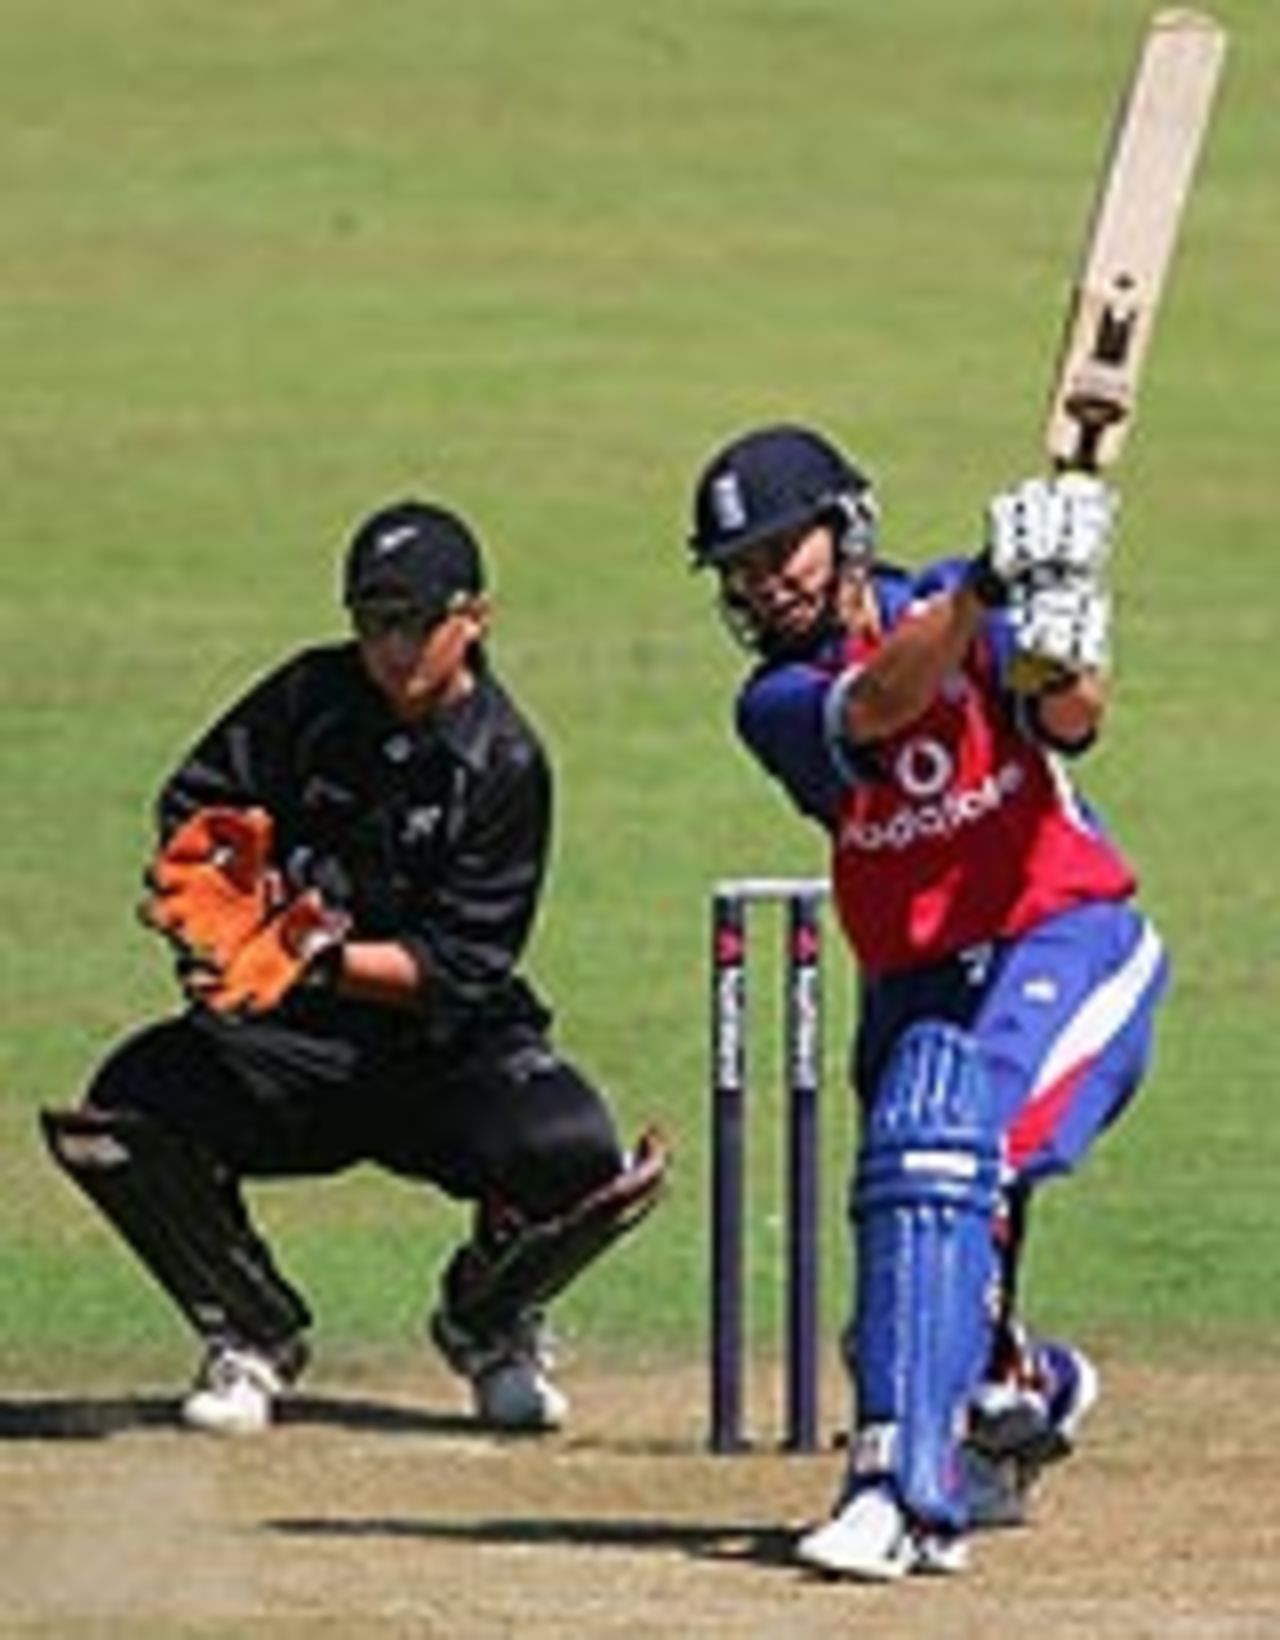 Clare Connor drives, England v New Zealand, first one-day international, Hove, August 6, 2004